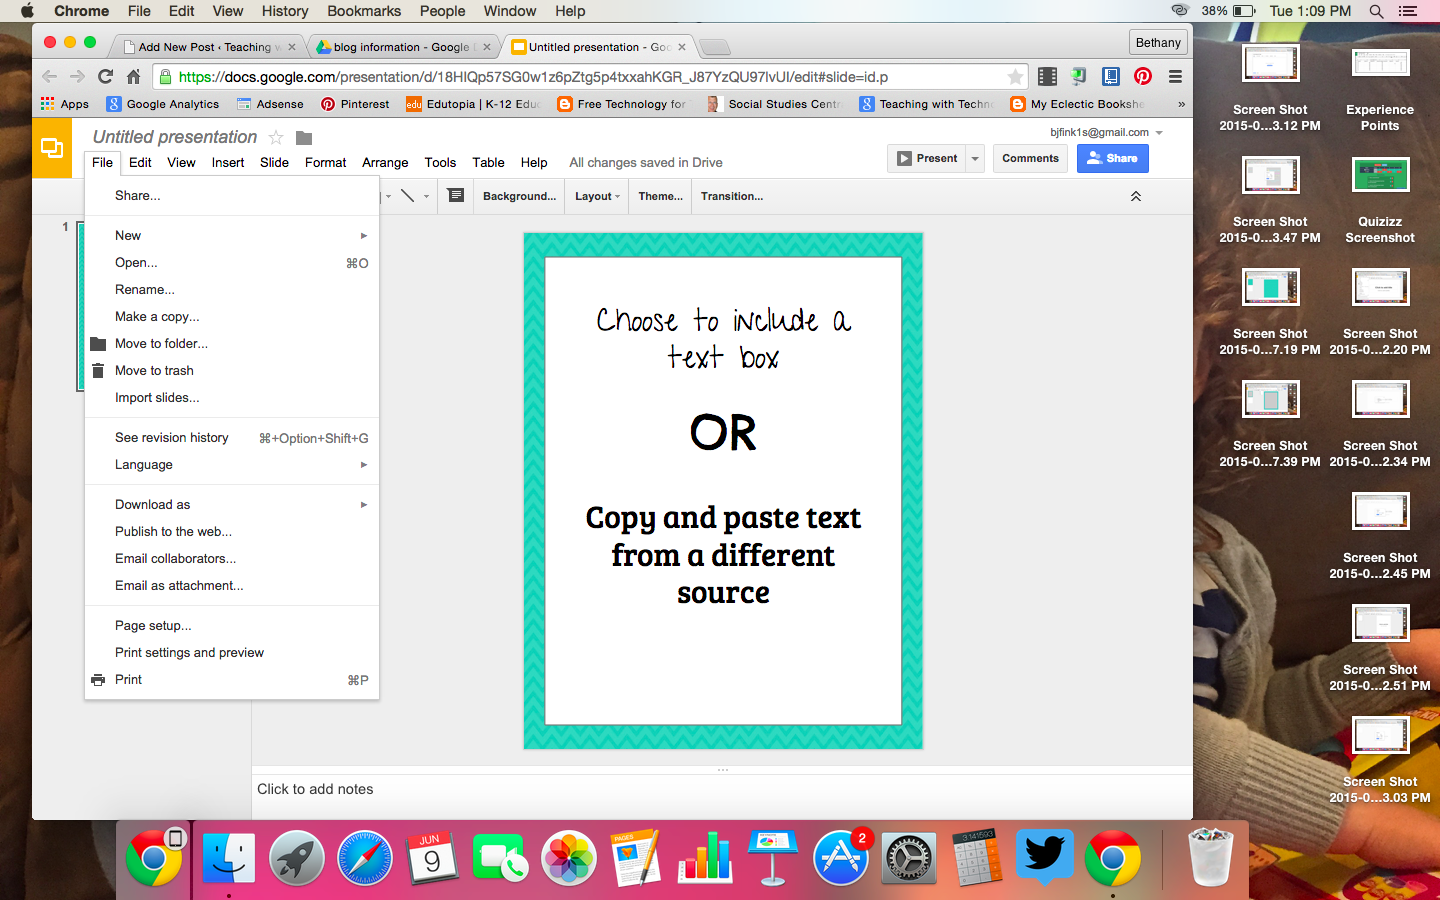 How to Add Backgrounds in Google Docs: A Workaround